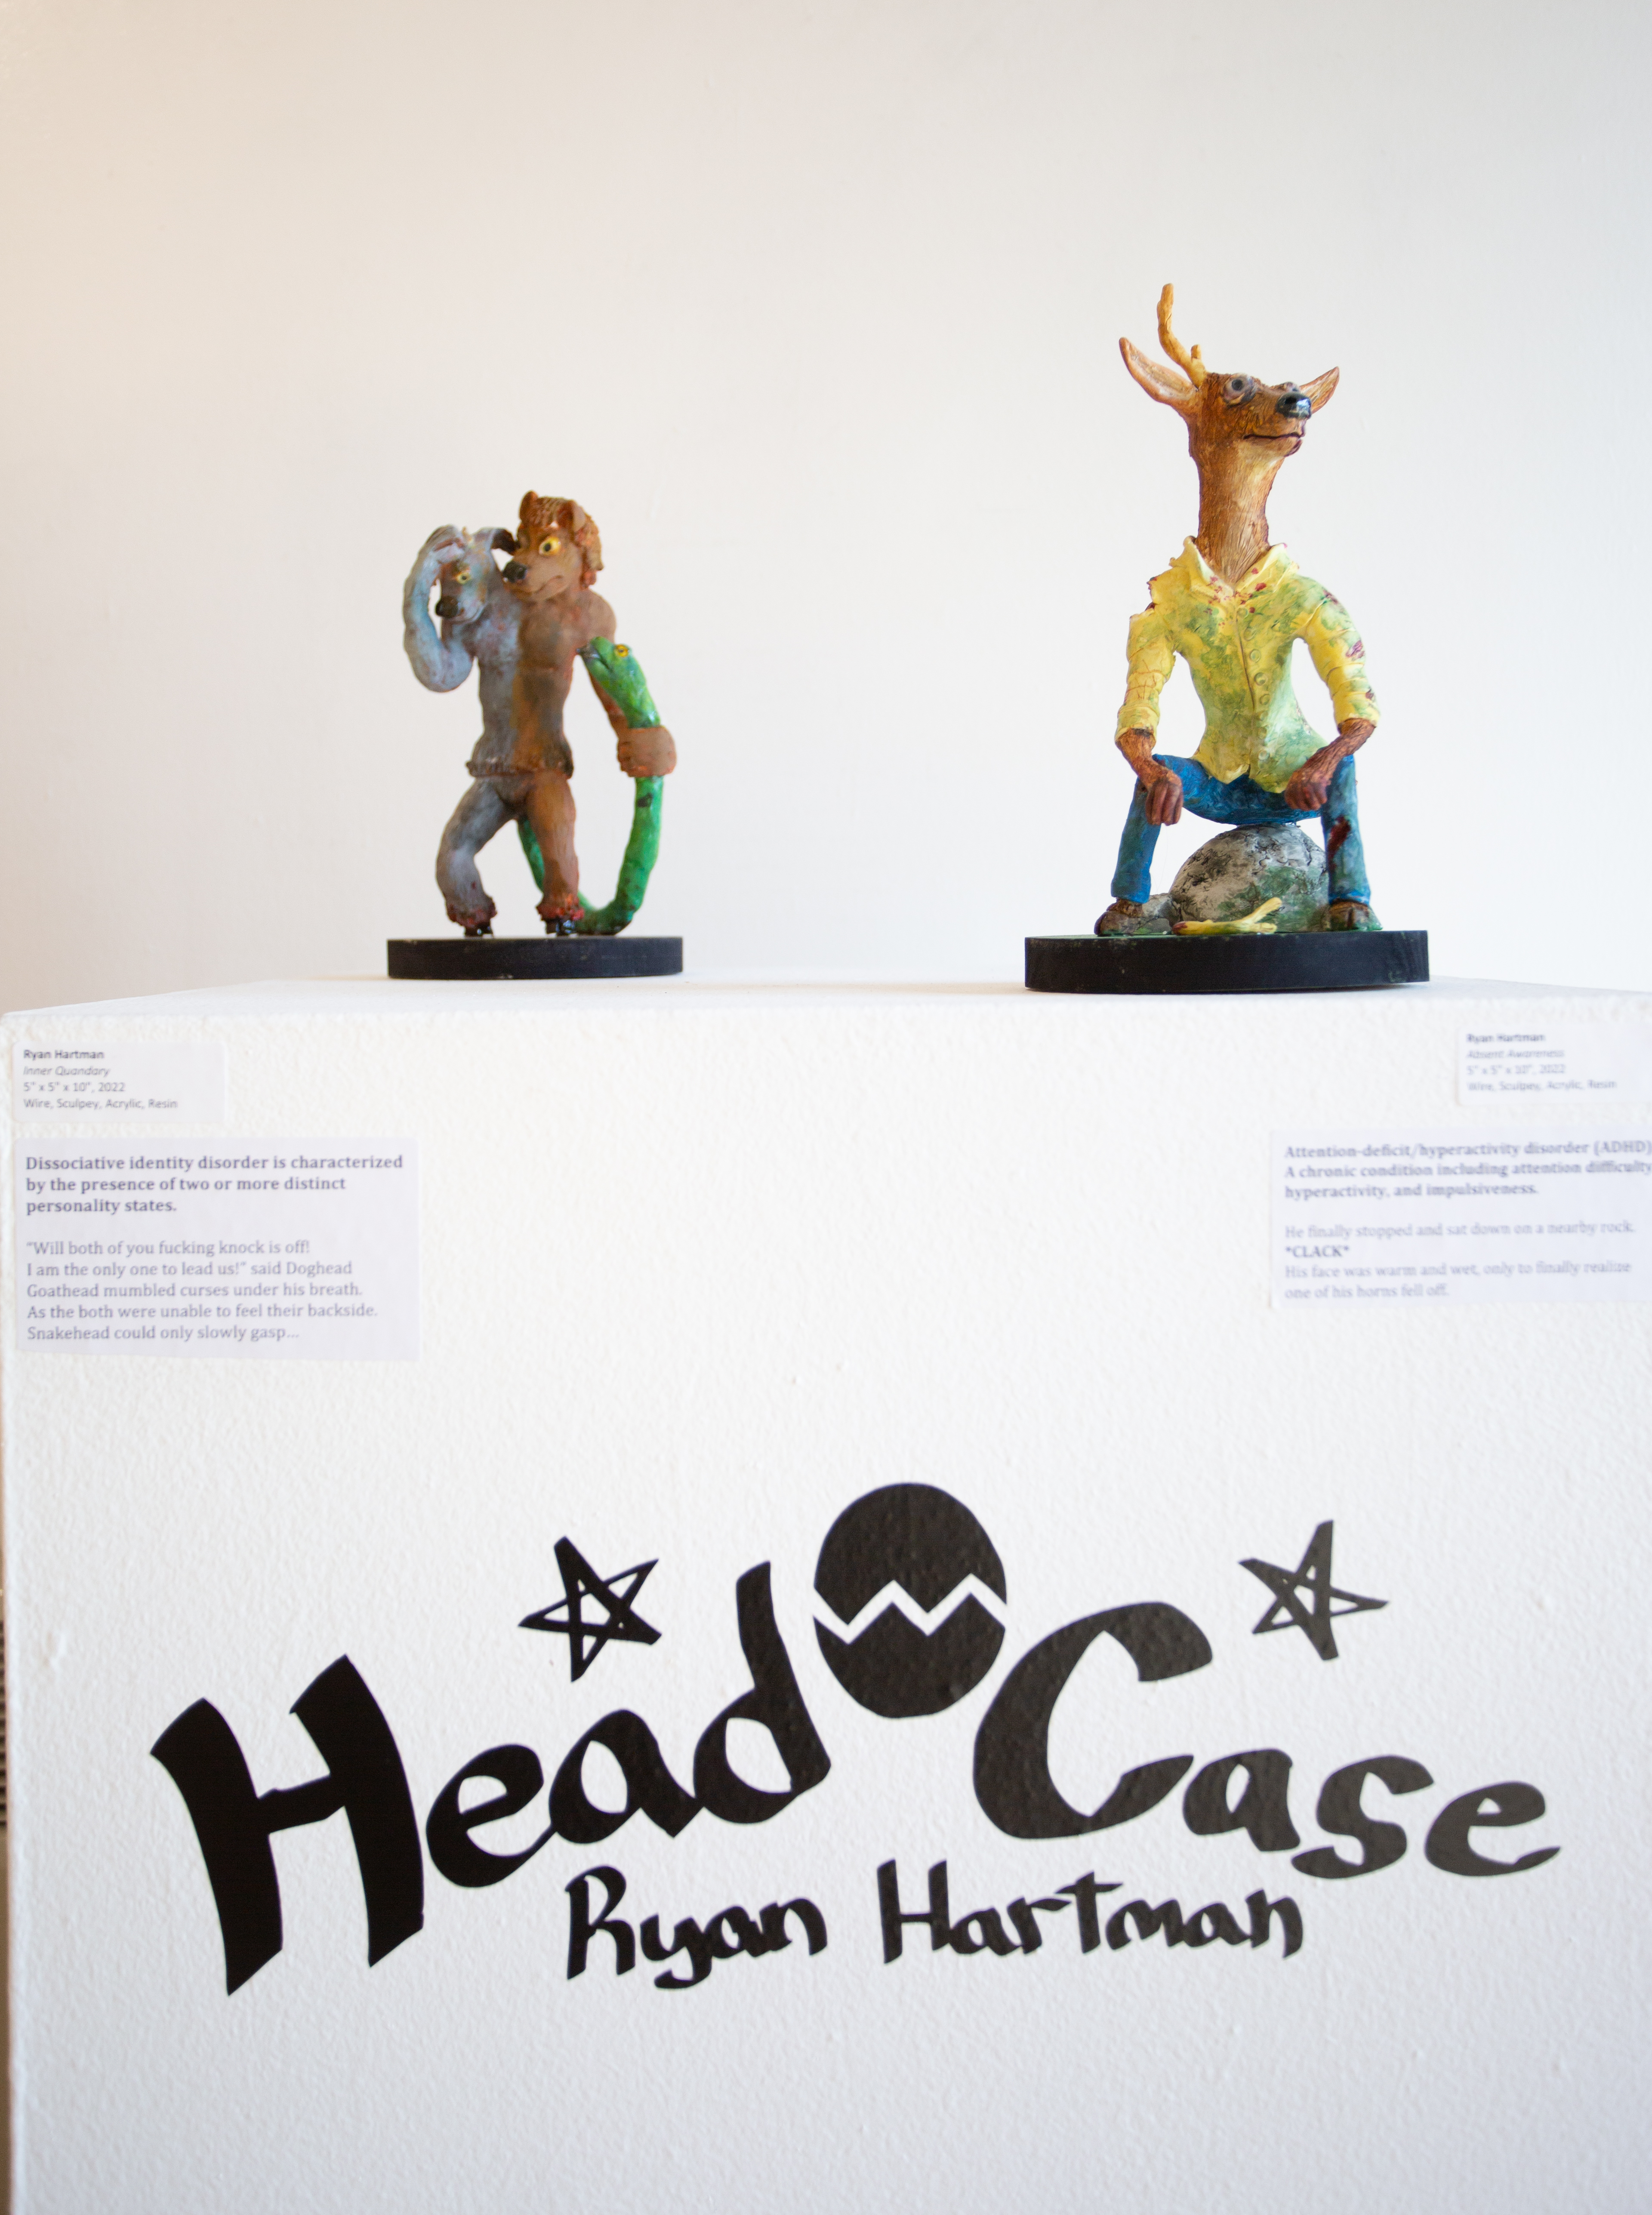 Two clay figures on a podium with the title, "Head Case: Ryan Hartman" at the bottom. The right figure is an anthropomorphized deer in a button-up shirt, with antlers below it on the ground. 